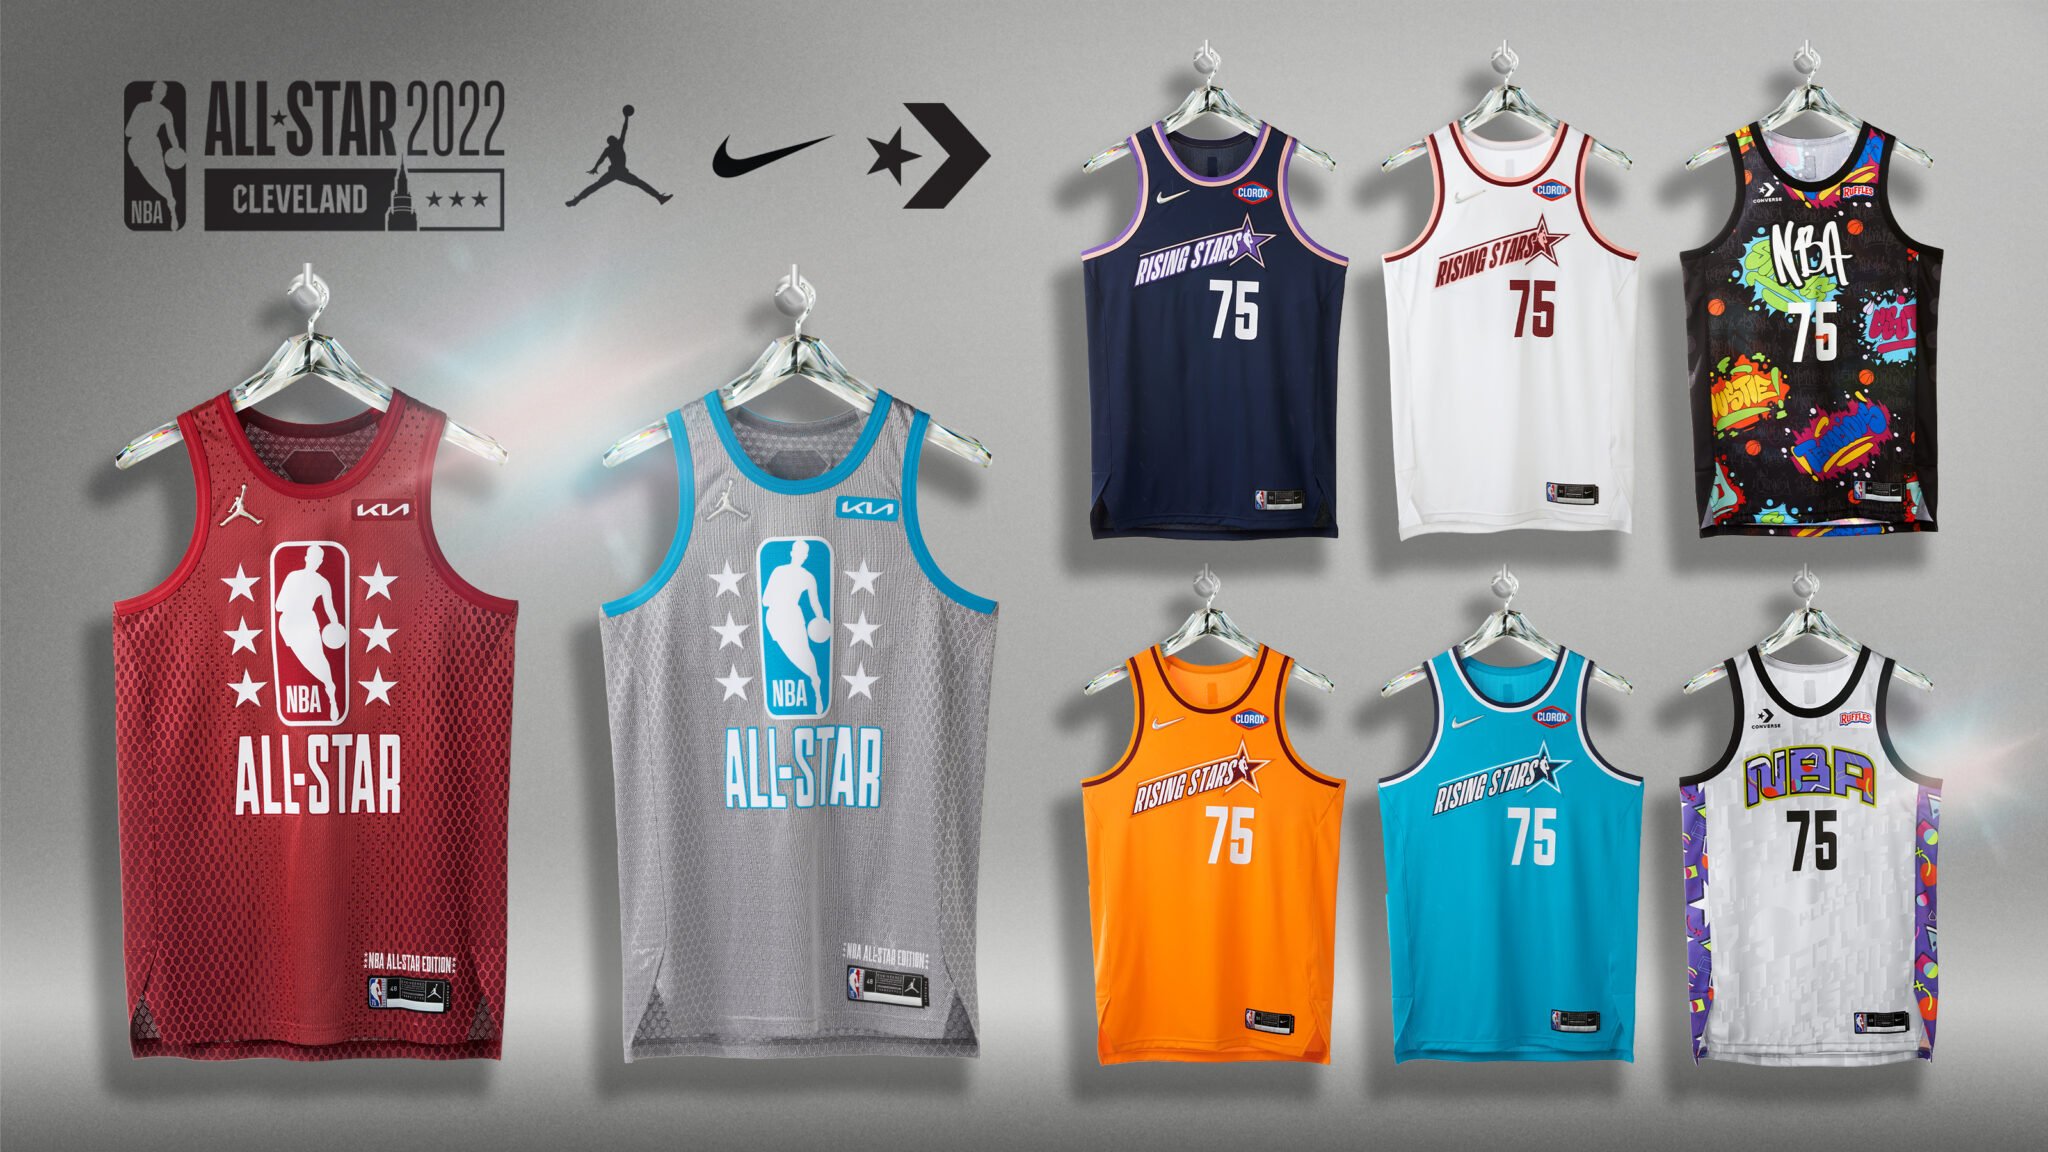 Grading The 2022 NBA All Star Game Uniforms